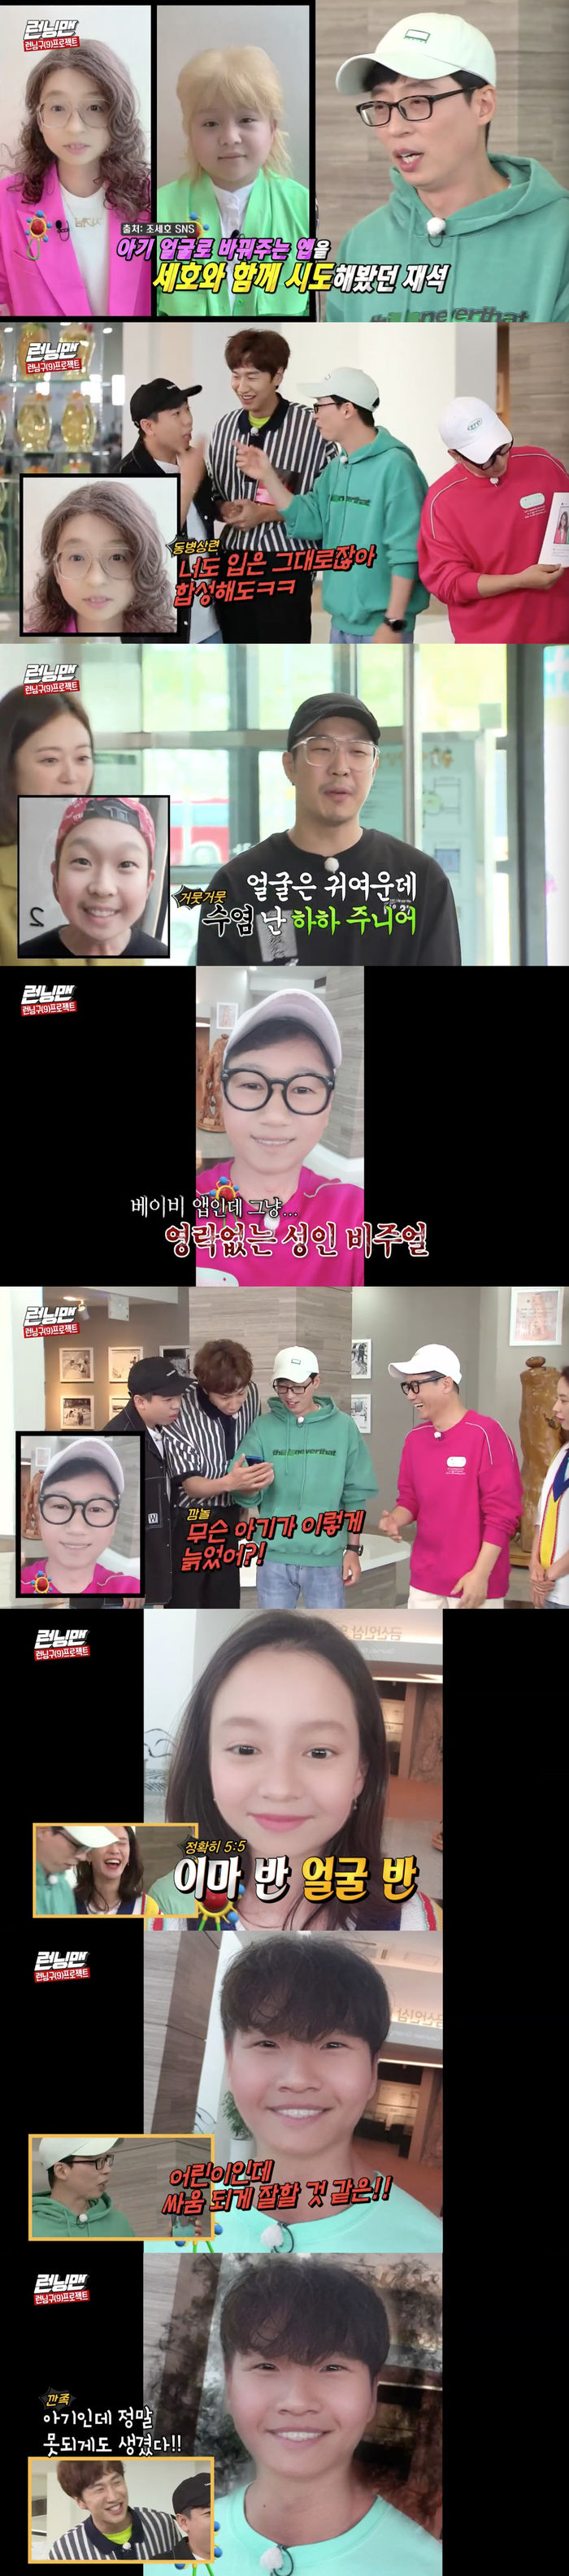 A photo of Running Mans baby face conversion has been released.On SBS Running Man broadcasted on the 16th, Theme Identification Race was held as part of Running Zone Project.On this day, the members released photos of the members who recently converted into a hot baby face application.Its my mother, Park Jae-seok is my brothers mother, she looks just like her mother, said Haha, who saw a picture of Yoo Jae-Suks baby face.Yang said, Park Jae-seok is the same as his brother.Yoo Jae-Suk then quipped numbly, Youre the same as you are - no skill can beat your mouth.Yoo Jae-Suk then asked to change Ji Seok-jins face to a babys face, too; Lee Kwang-soo, who confirmed the photo, said, Why is the baby so old?Haha said, I just think I made a makeup.Lee Kwang-soo expressed his expectation about Song Ji-hyo, saying, Ji Hyo sister will be pretty.However, when I checked the picture of Song Ji-hyo, I pointed out a wide forehead saying, Wow, this is not Hwangbihong.Kim Jong-kook then said, I do not do it. But he laughed brightly and took a picture.In a photo by Kim Jong-kook, Yoo Jae-Suk said, I am a child and I think I will fight well.Lee Kwang-soo also laughed, saying, The child is not enough.